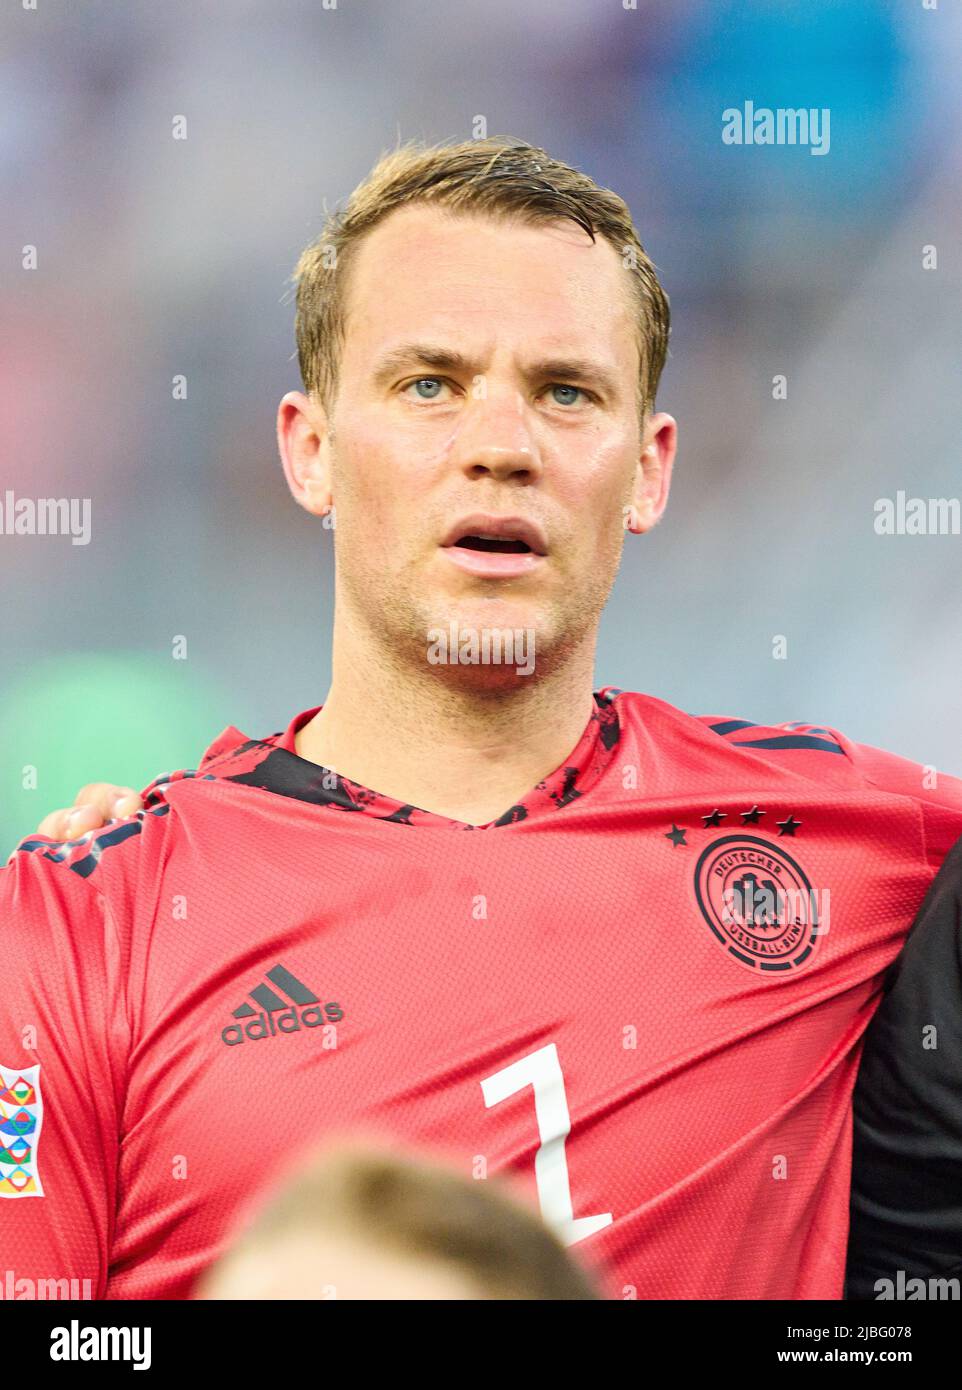 Manuel NEUER, DFB 1 goalkeeper,   in the UEFA Nations League 2022 match ITALY - GERMANY 1-1  in Season 2022/2023 on Juni 04, 2022  in Bologna, Italy.  © Peter Schatz / Alamy Live News Stock Photo